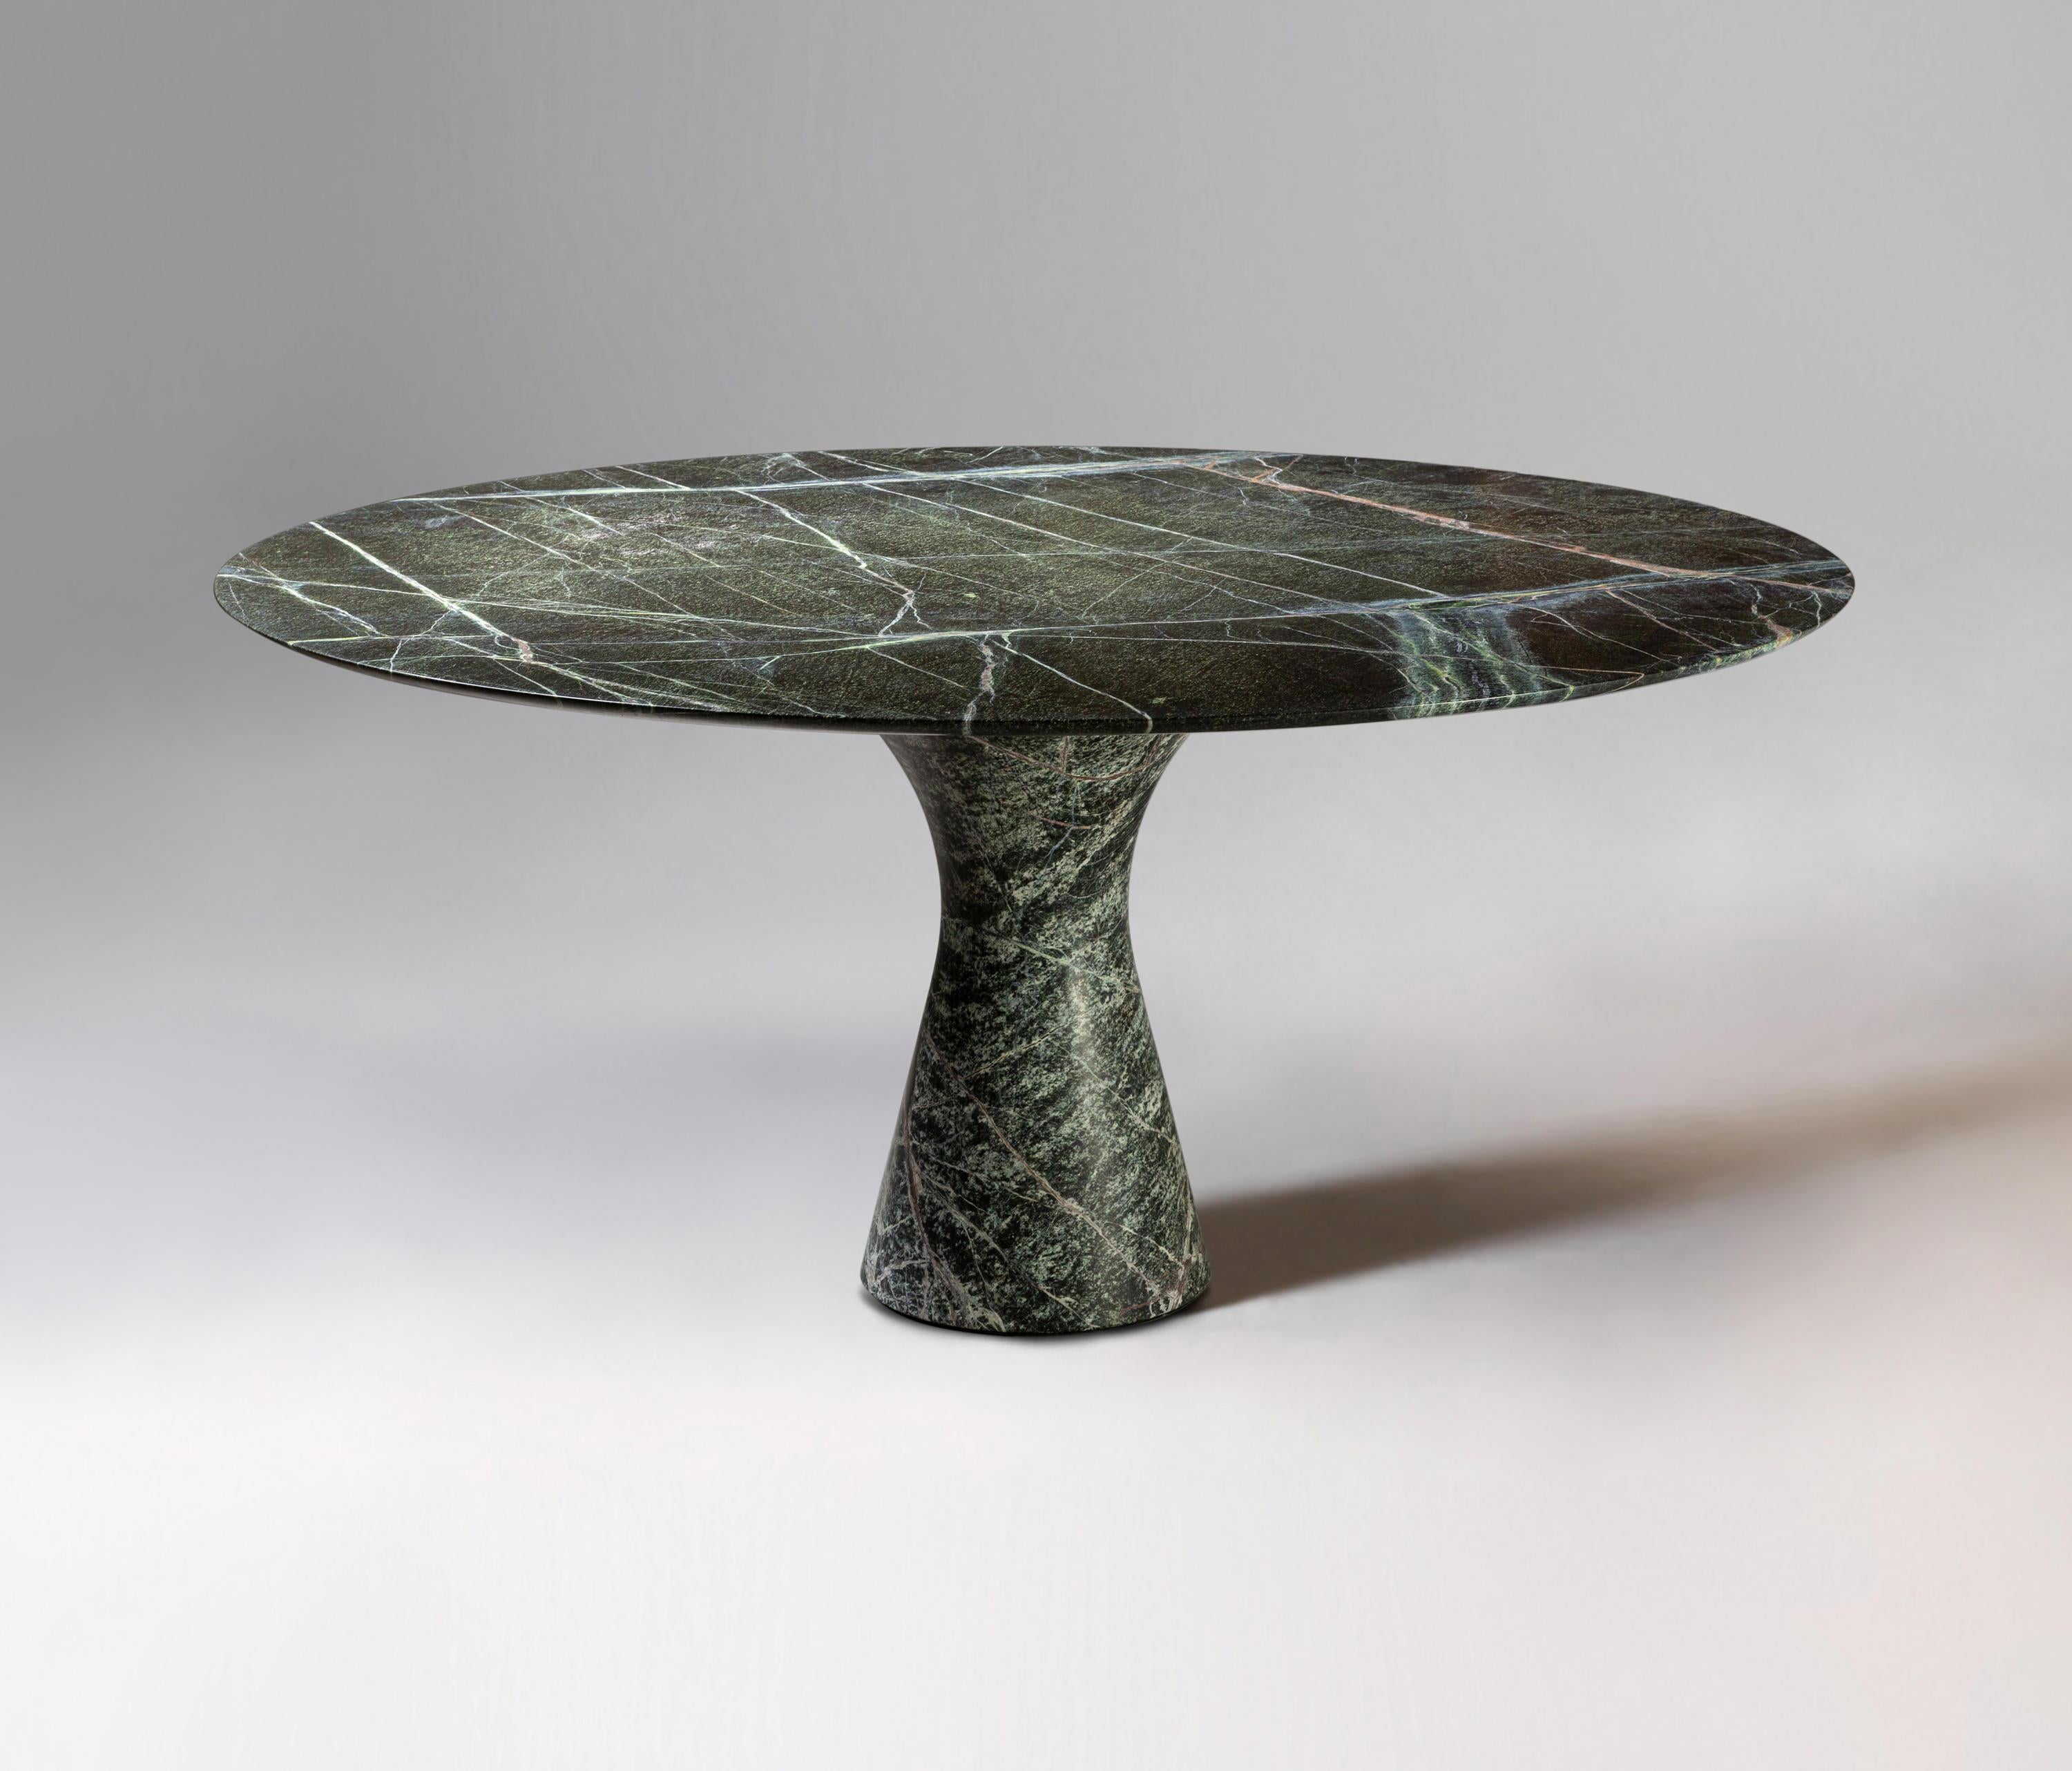 Italian Port Saint Laurent Refined Contemporary Marble Dining Table 130/75 For Sale